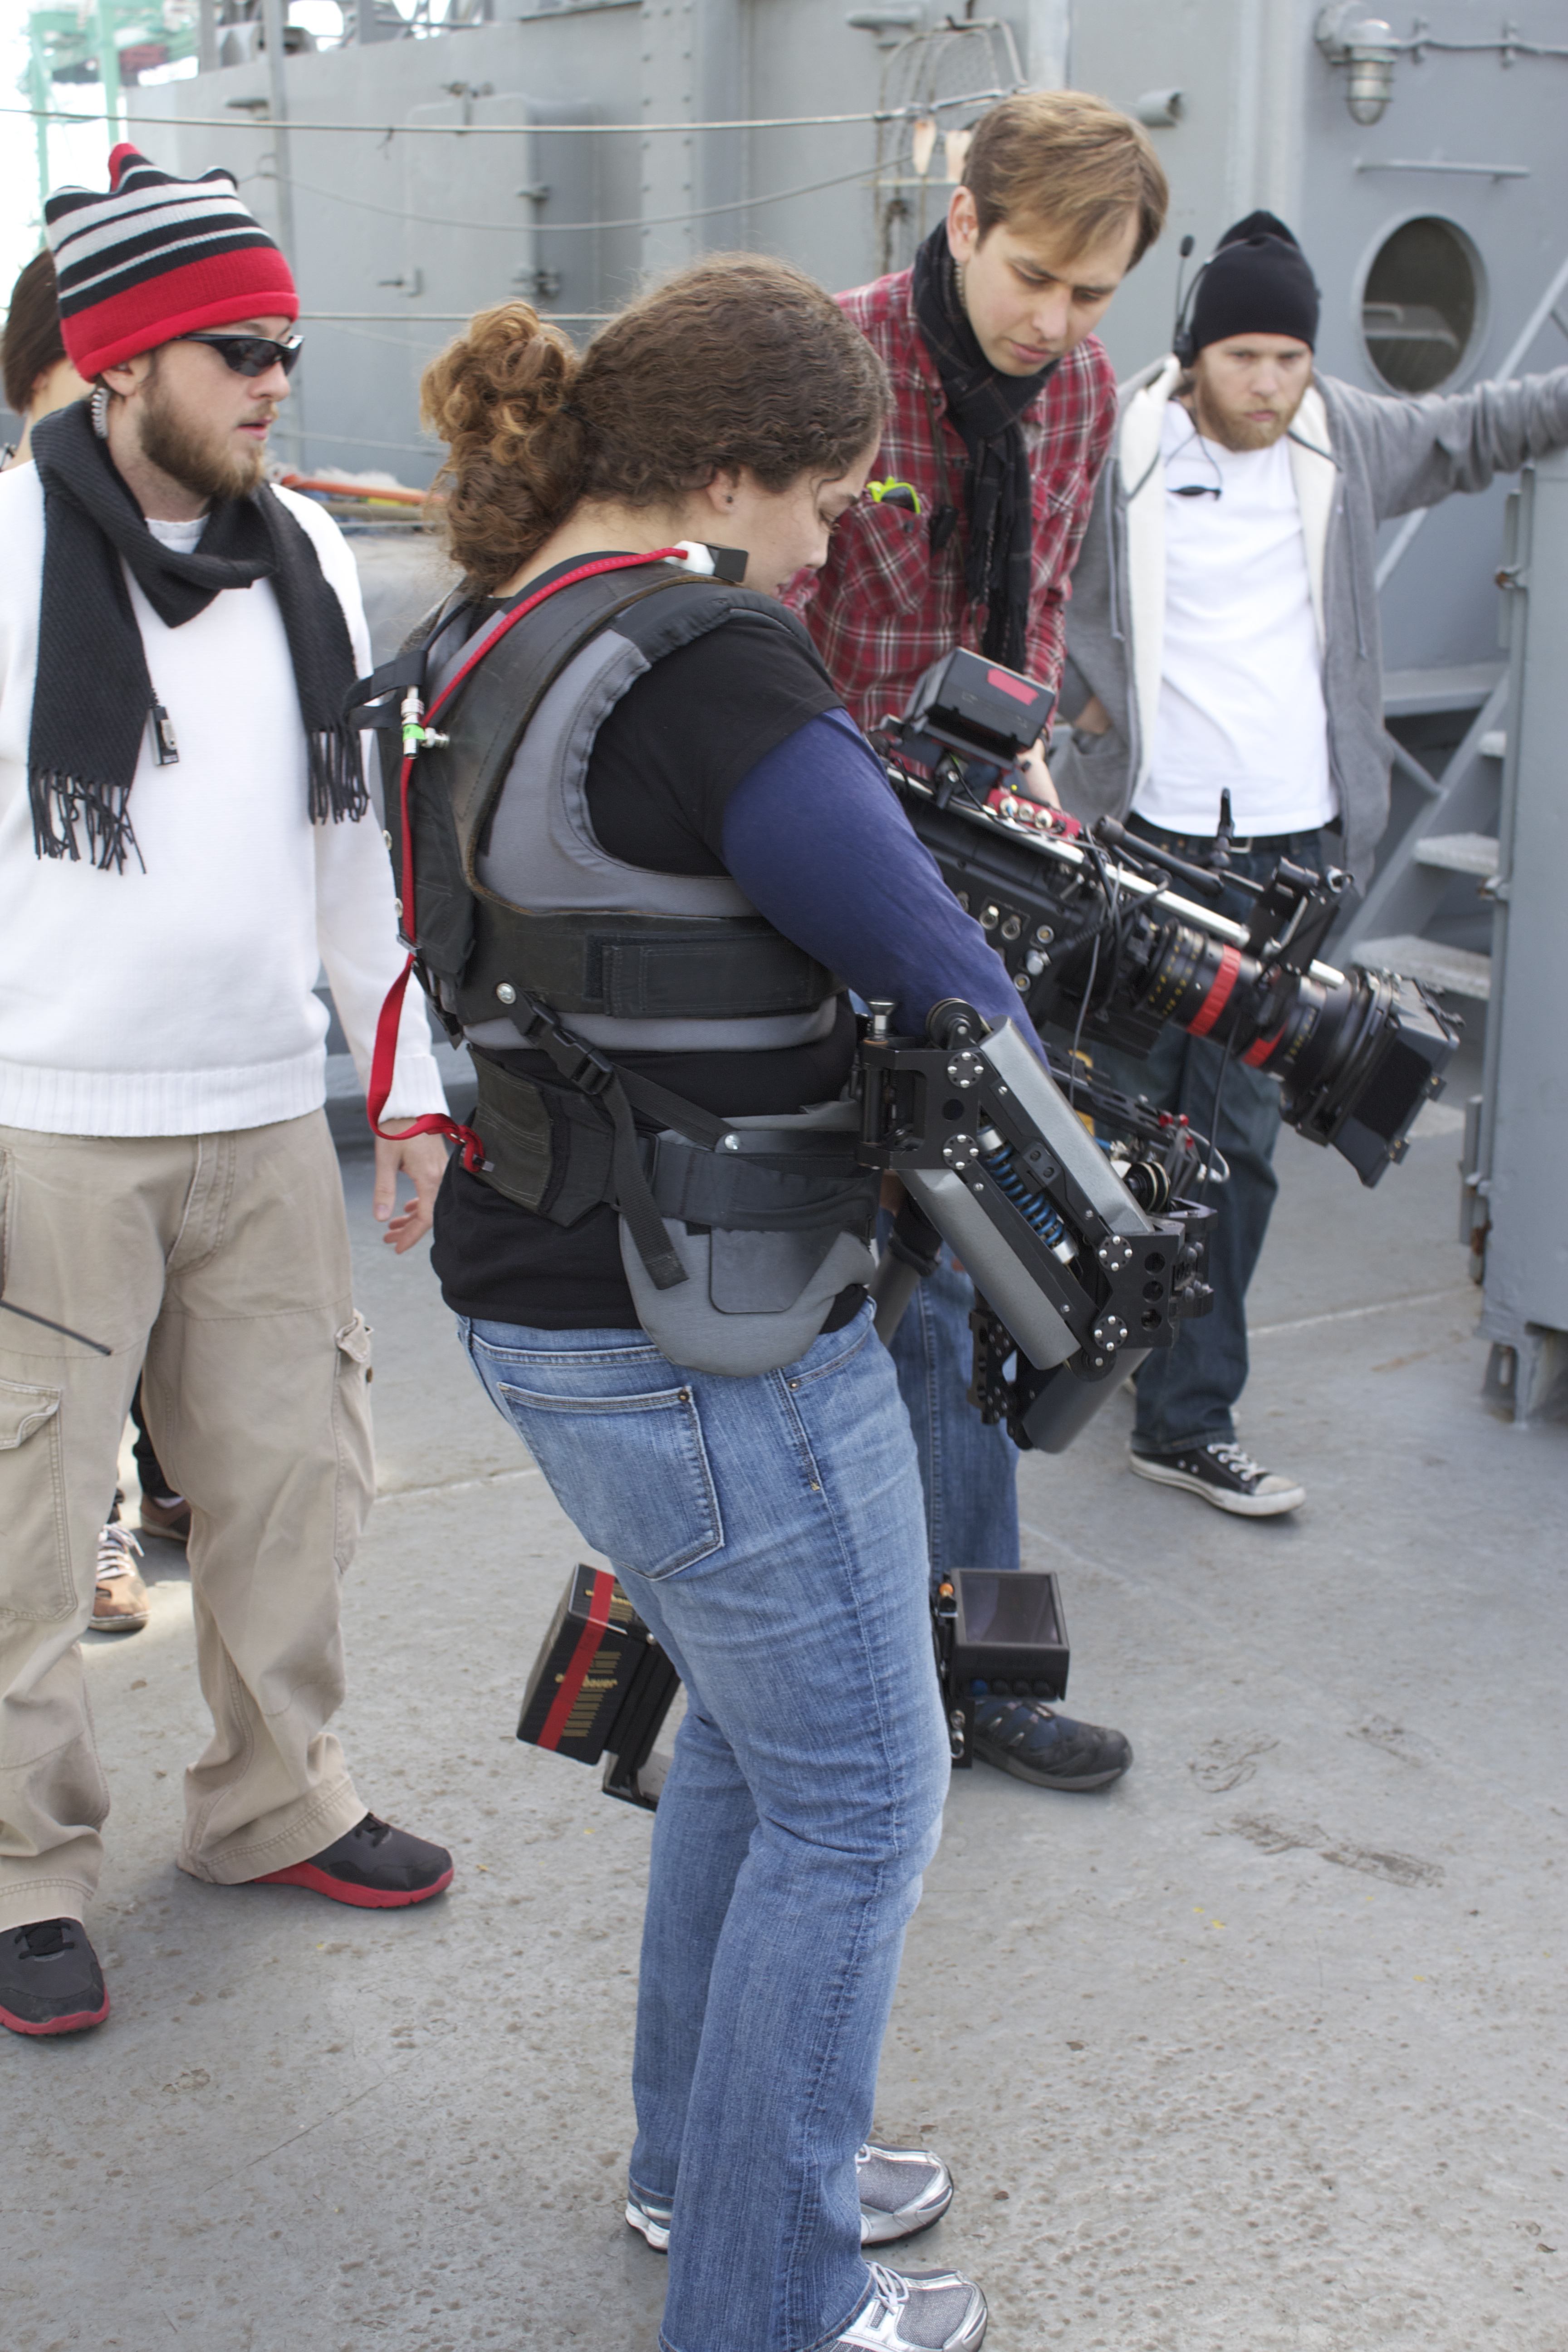 Steadicam Operator on the set of the film 